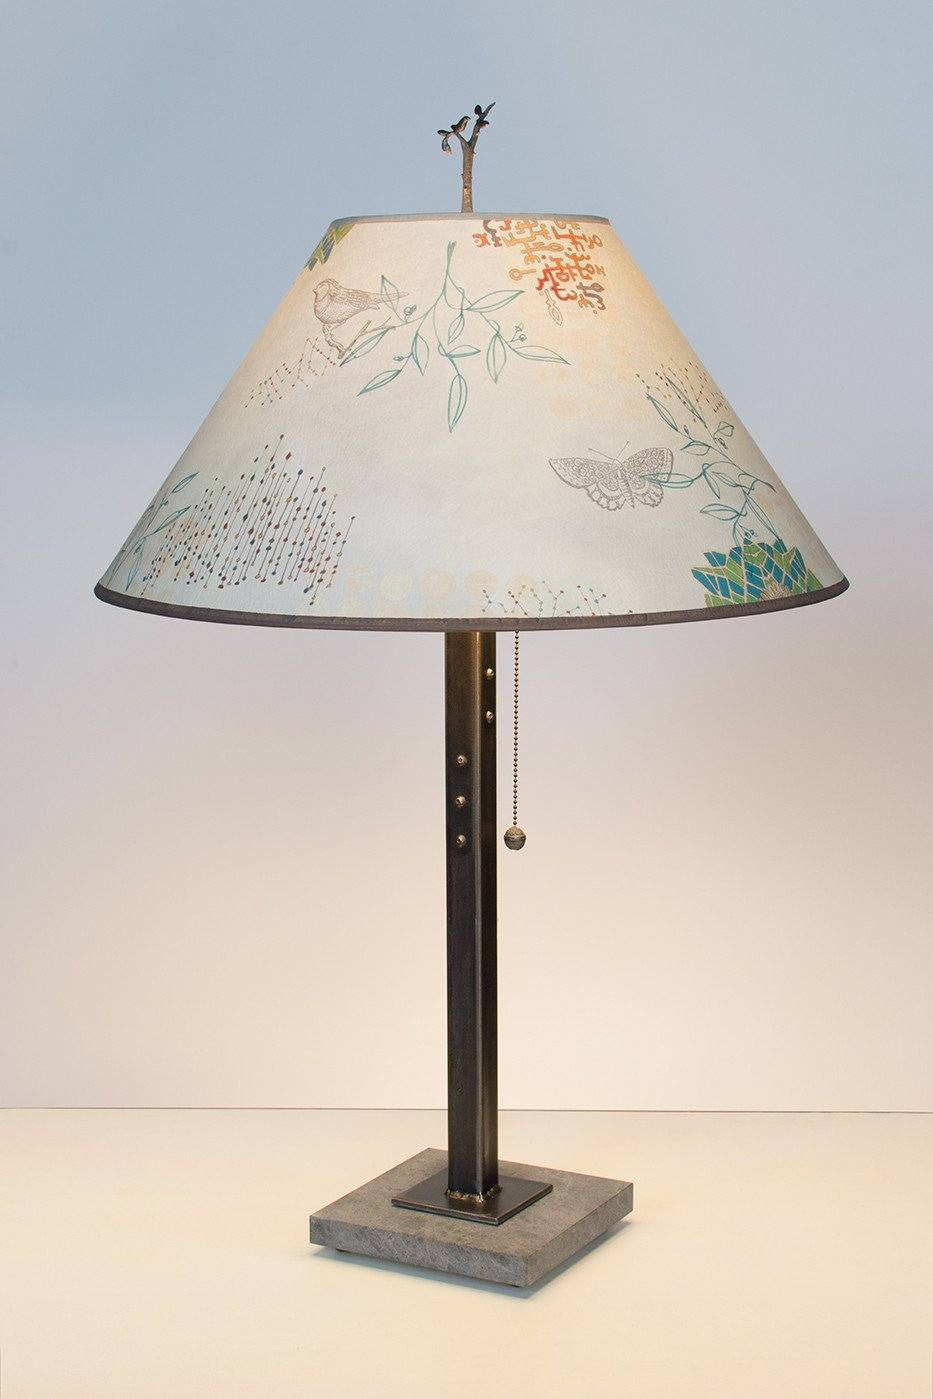 Janna Ugone &amp; Co Table Lamps Steel Table Lamp with Large Conical Shade in Ecru Journey